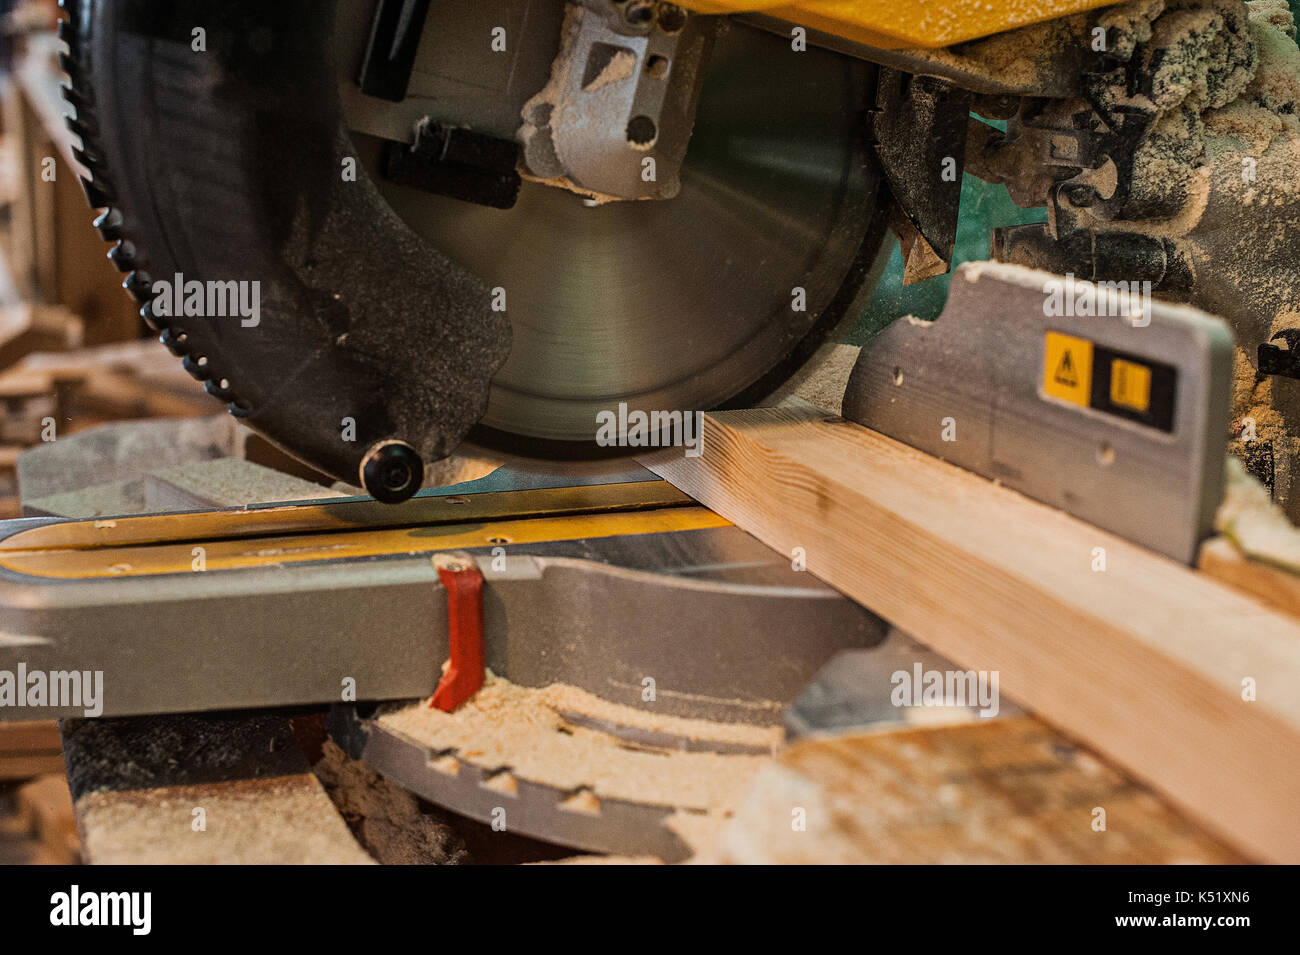 Circular saw with a wooden beam and measuring scale. Sawing a wooden beam with a circular saw. close Stock Photo